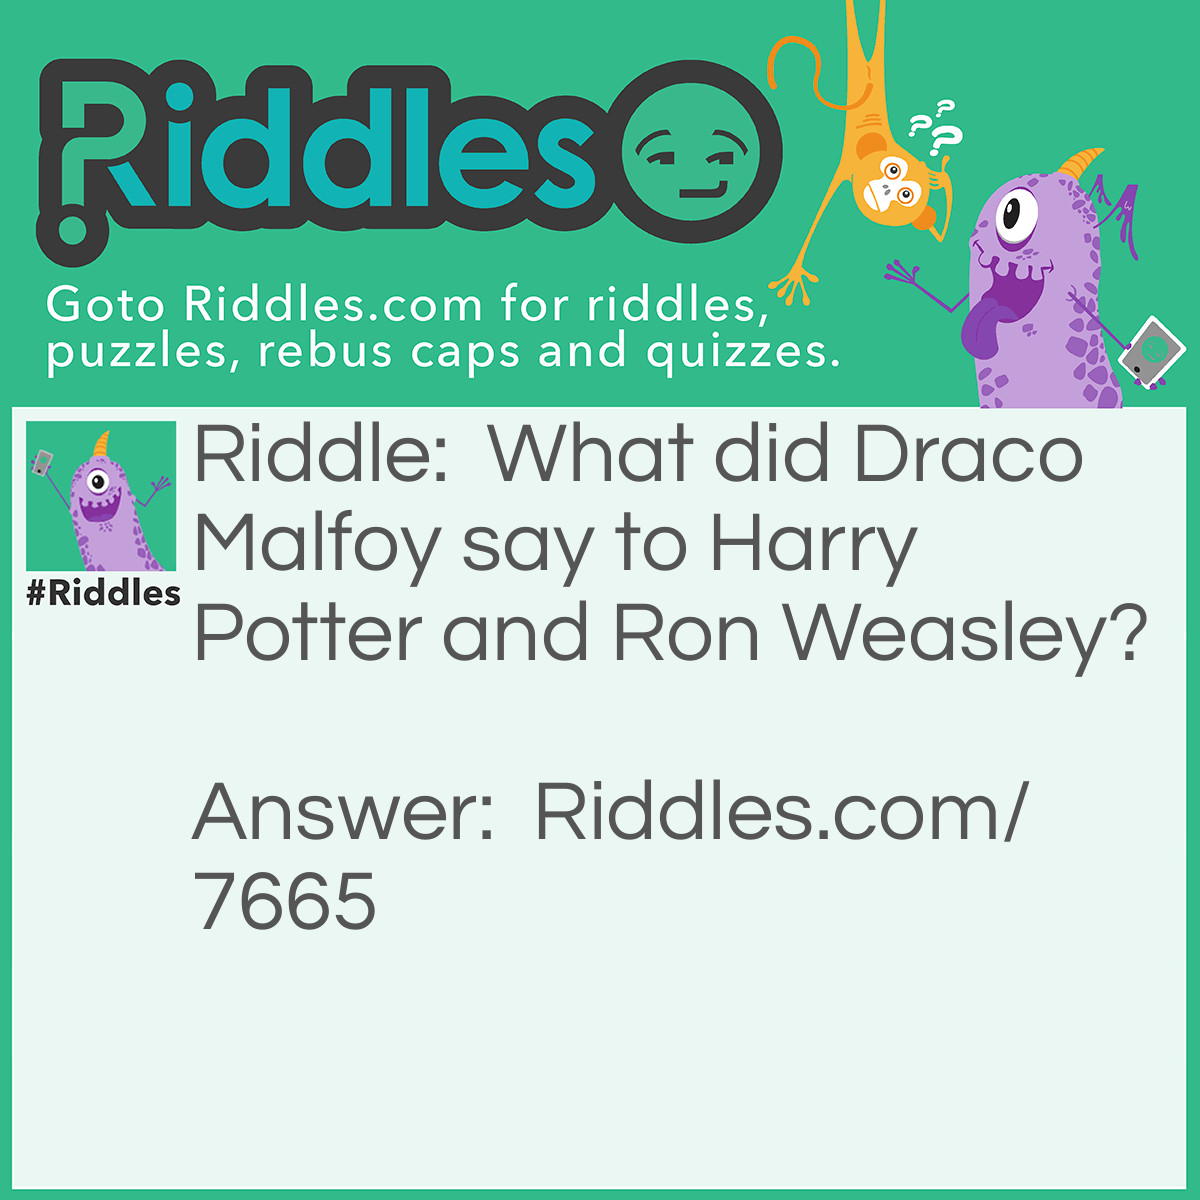 Riddle: What did Draco Malfoy say to Harry Potter and Ron Weasley? Answer: You two idiots are completely incompetent wizards.